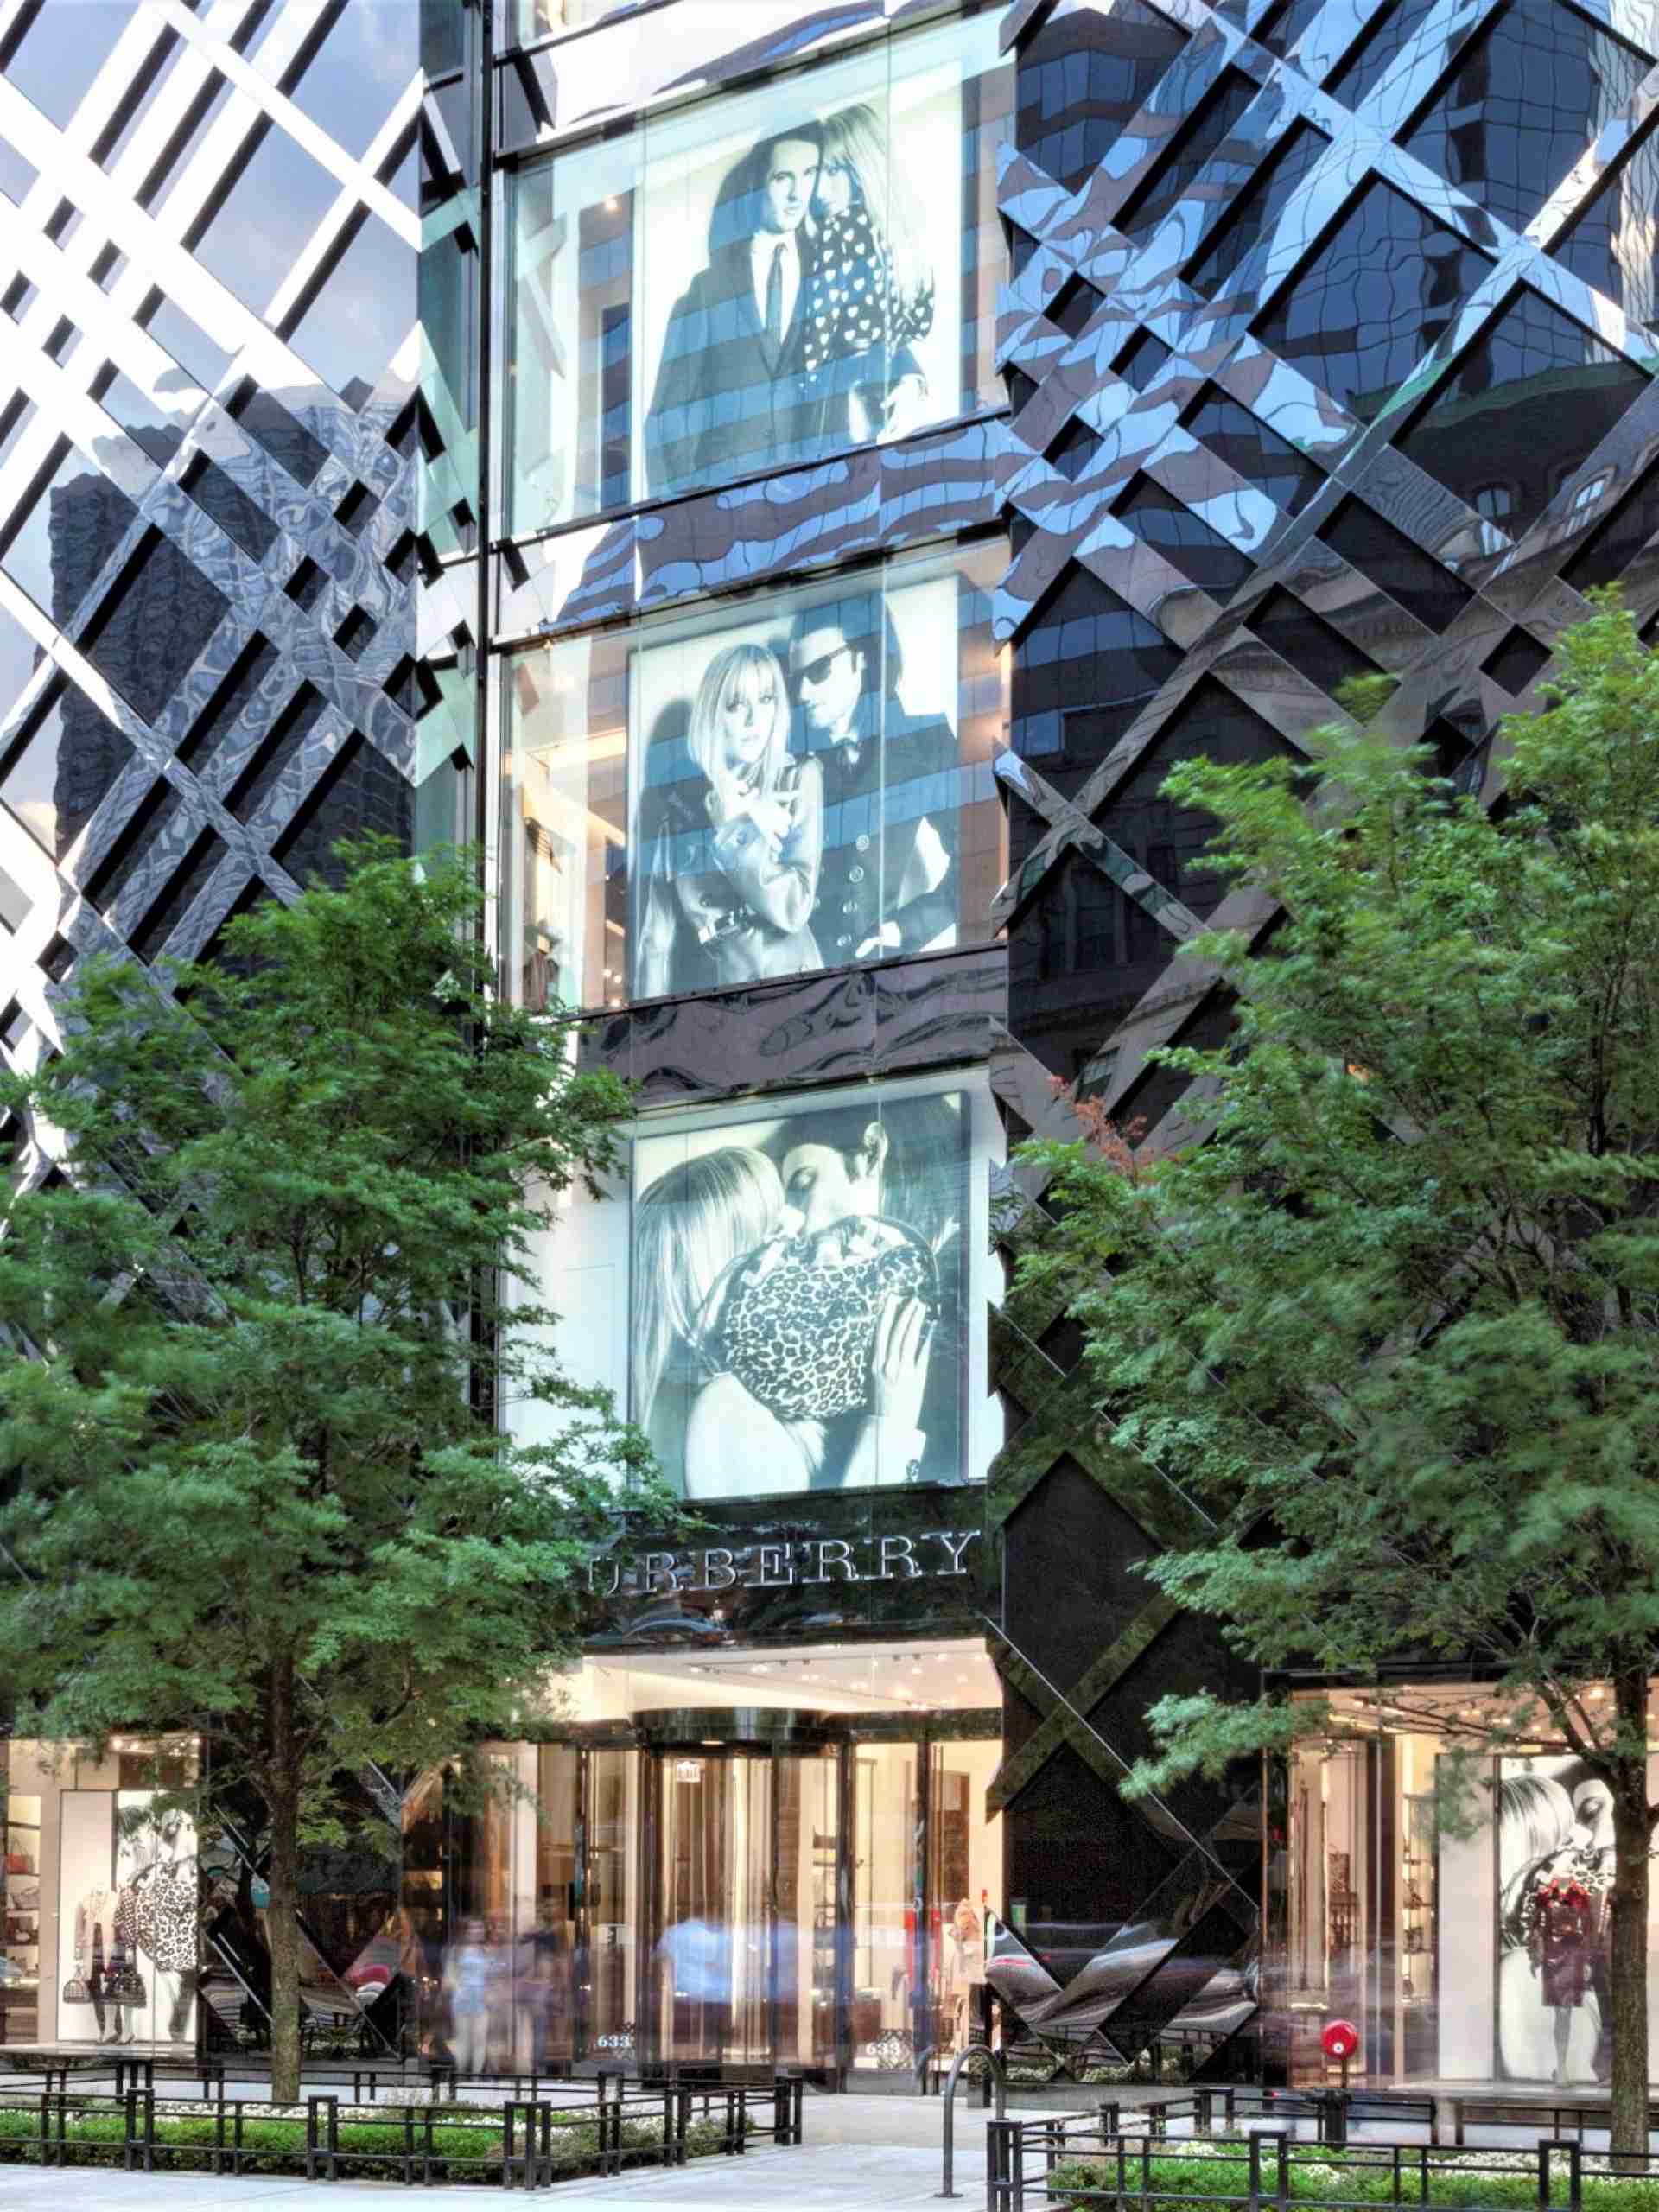 Burberry signage trees4mp